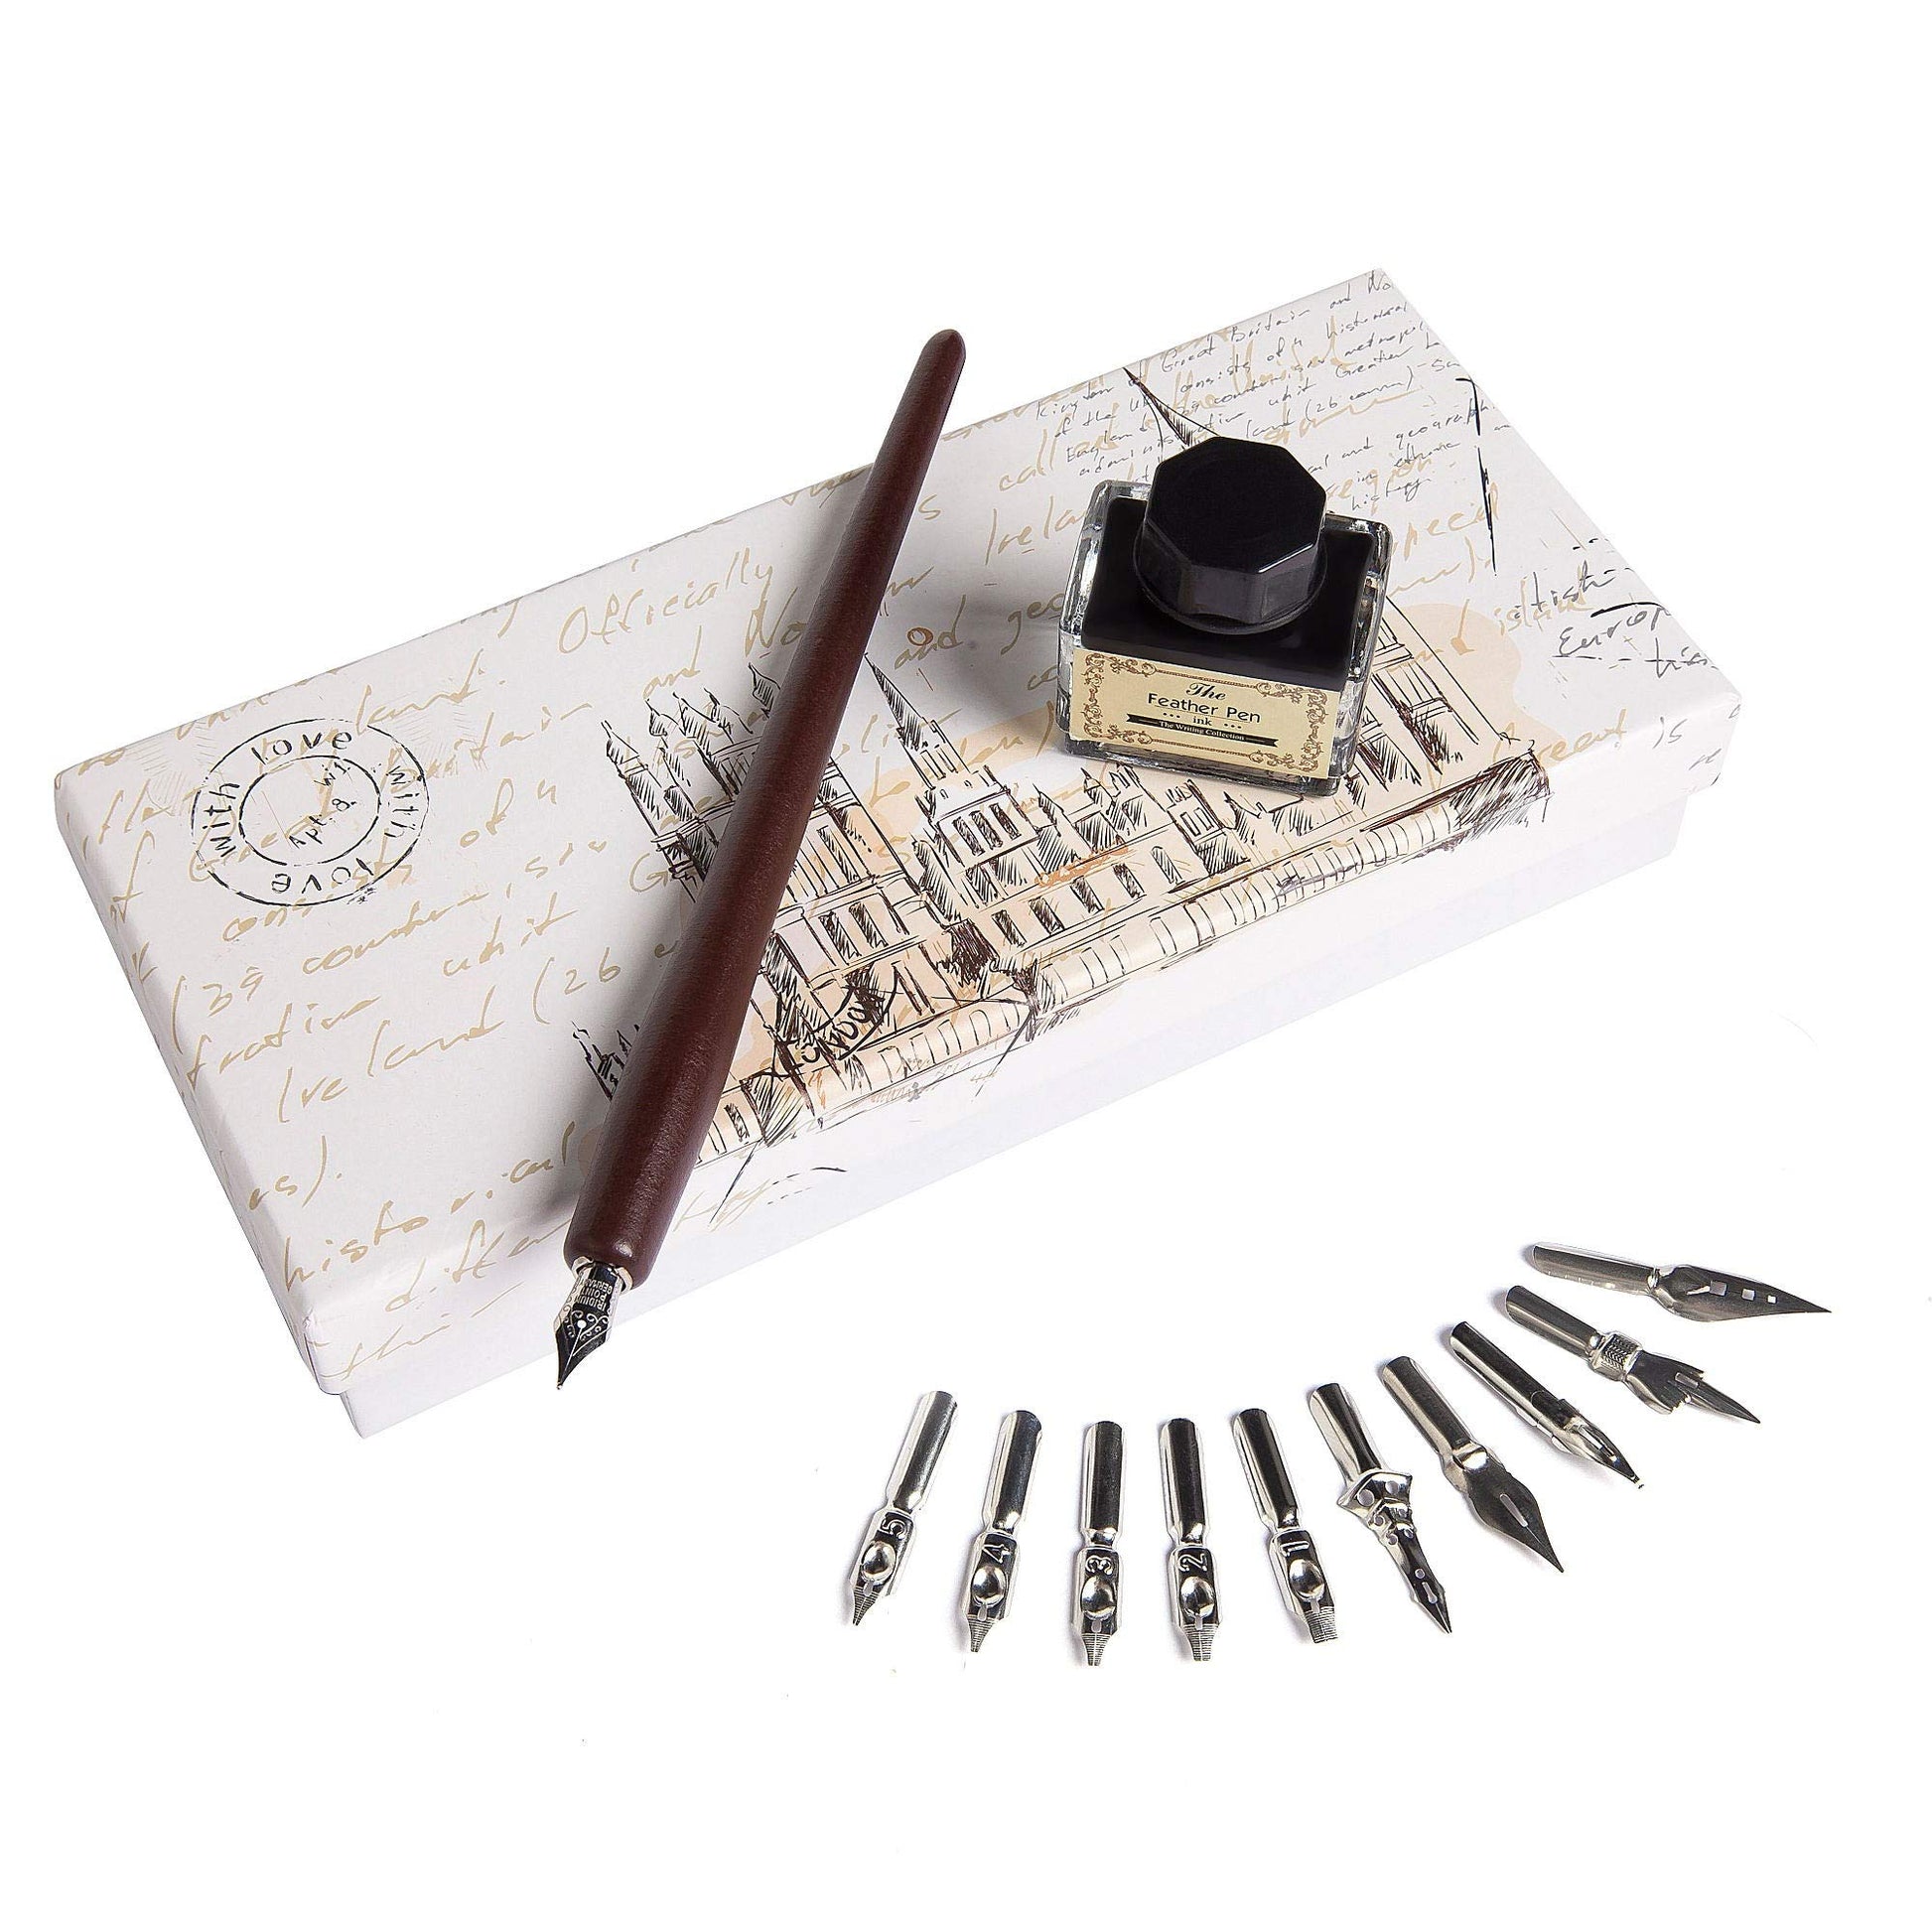 Hethrone Feather Pen and Ink Set - Quill Pens Calligraphy Pen Set Fountain Dip Pen